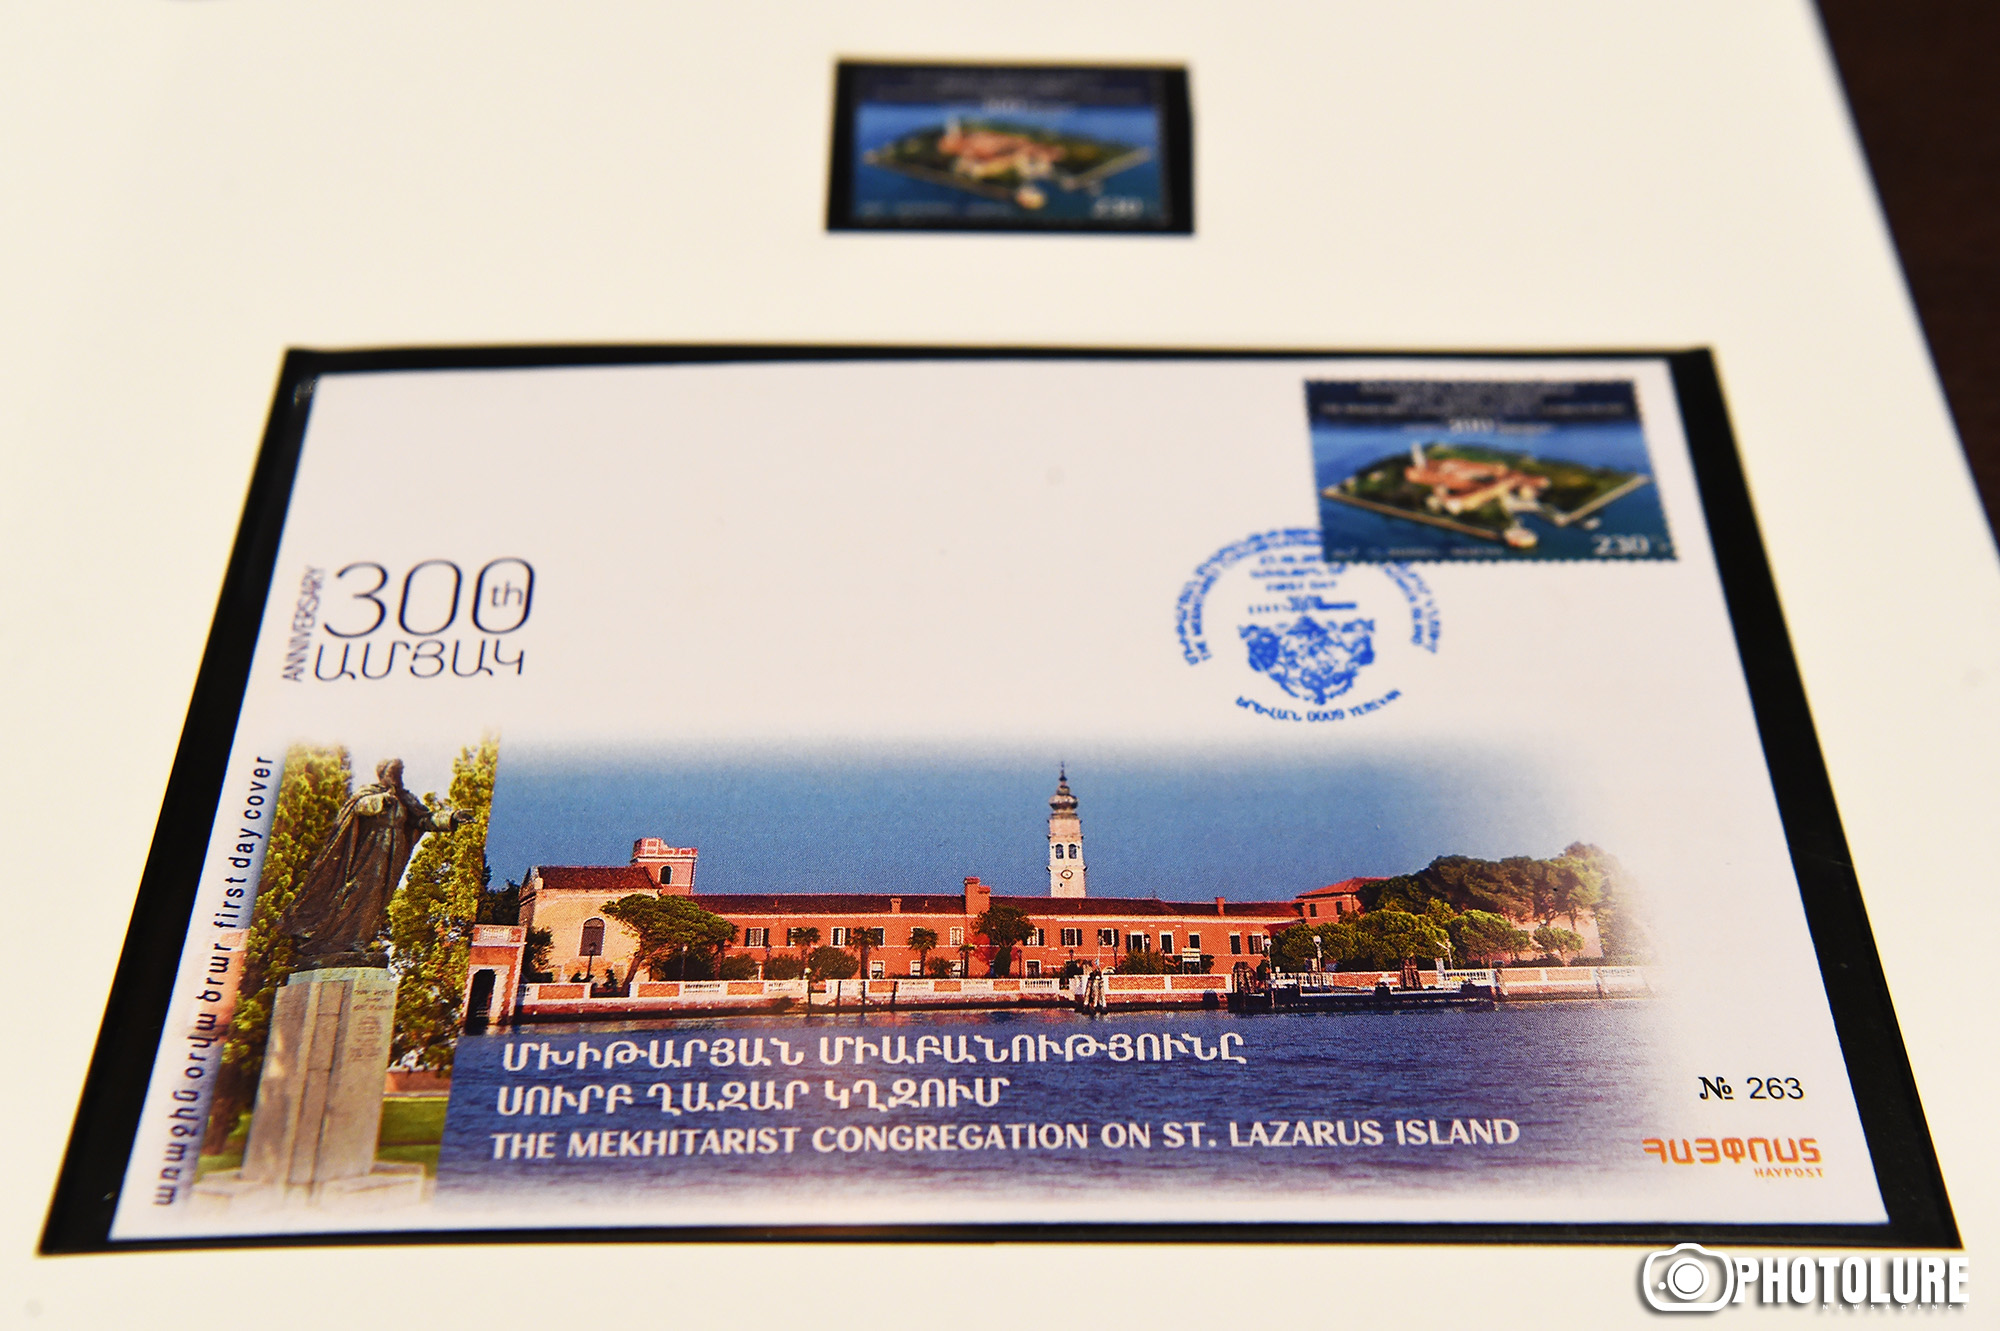 New postage stamp dedicated to the theme “300th anniversary of establishment of the Mekhitarist Congregation on St. Lazarus Island”